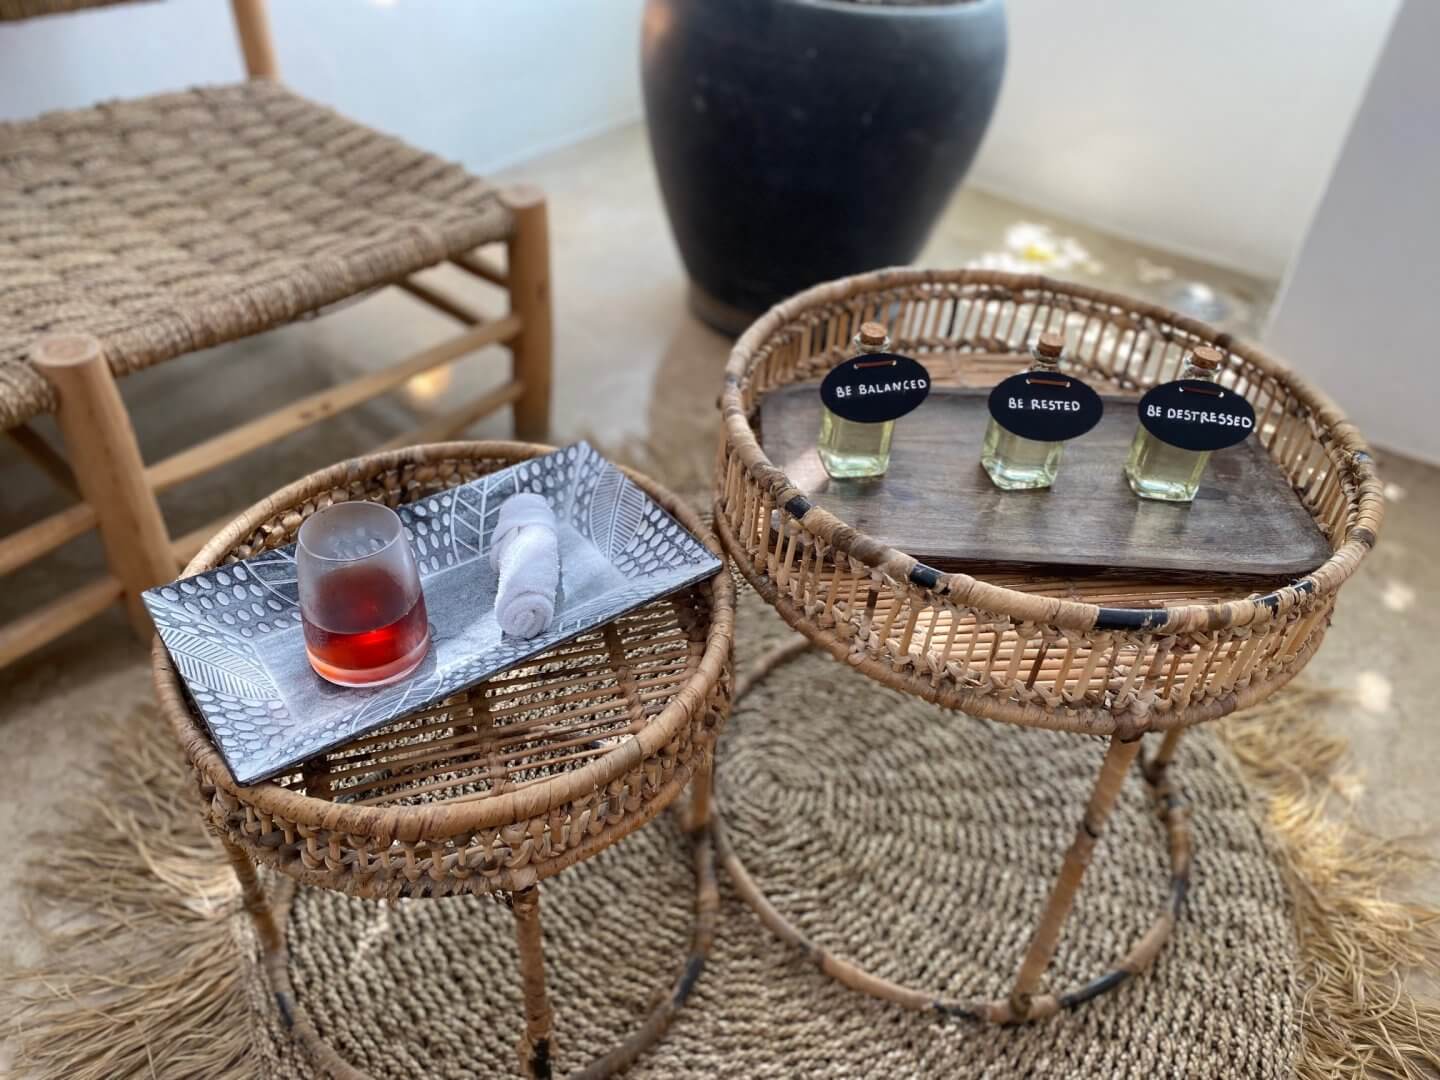 Wicker tables with 3 massage oils in glass bottles on one and a hot towel and Rooibos tea on the other